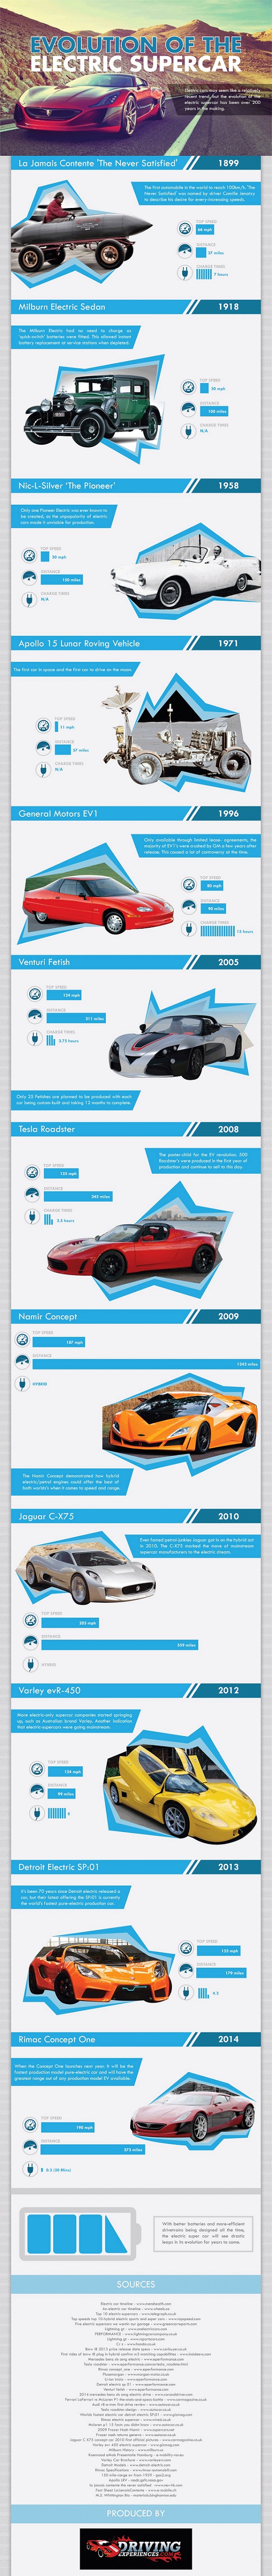 The evolution of the electric supercar